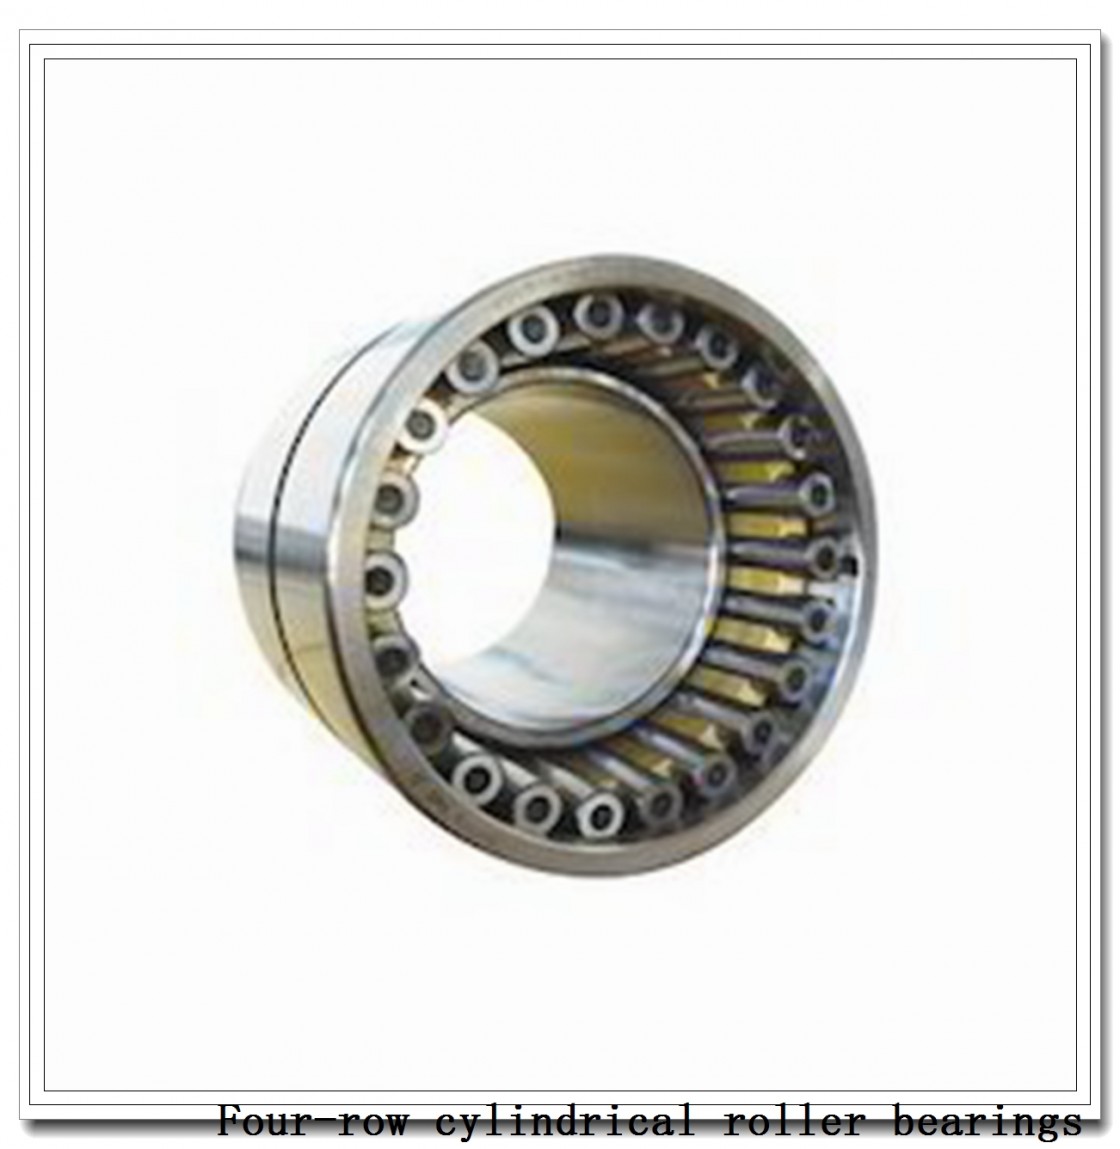 780ARXS3141 853RXS3141 Four-Row Cylindrical Roller Bearings